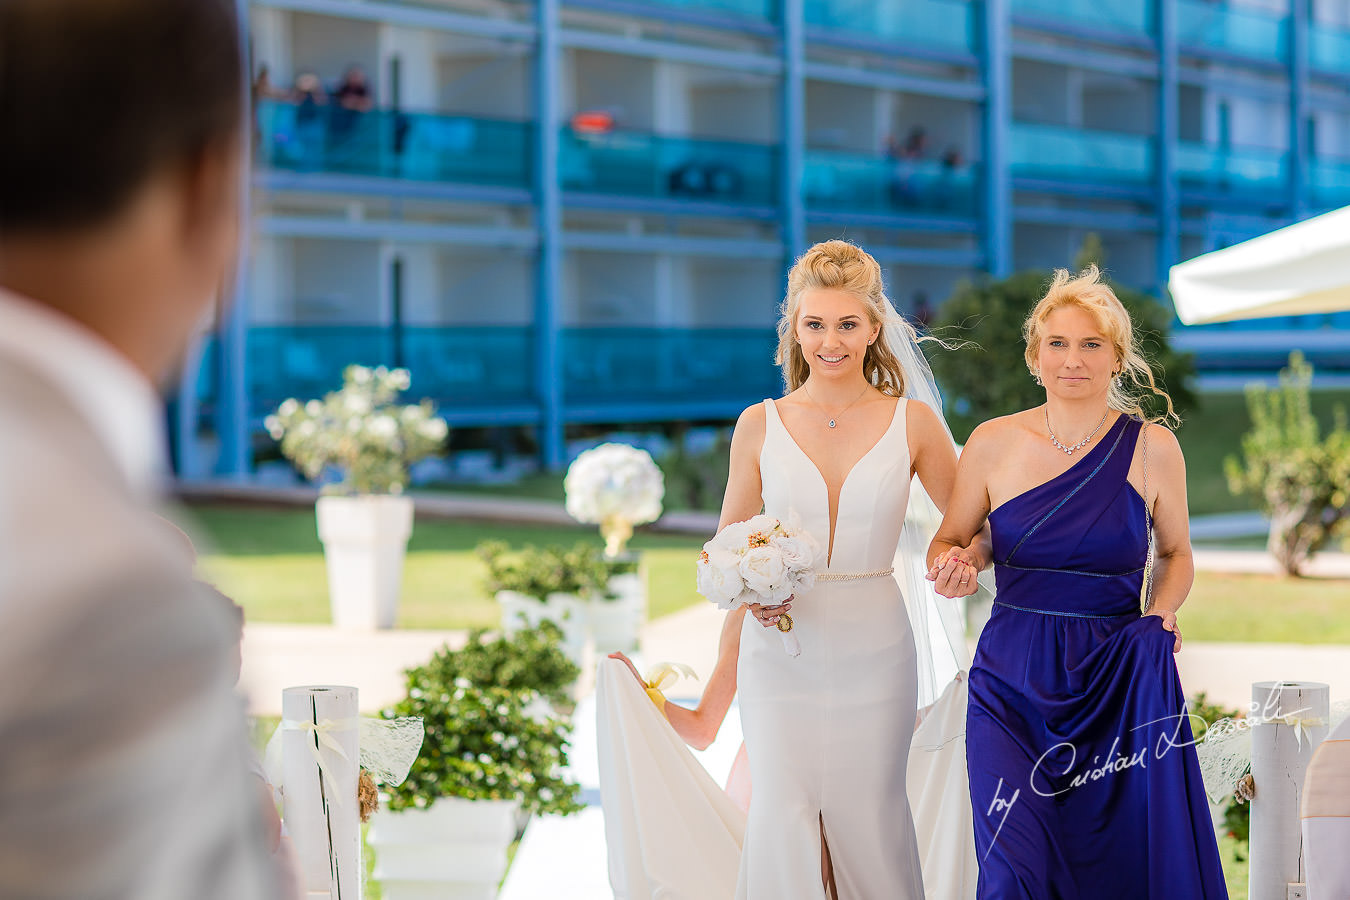 Bride arrival at an Exquisite Wedding at Asterias Beach Hotel. Photography by Cyprus Photographer Cristian Dascalu.